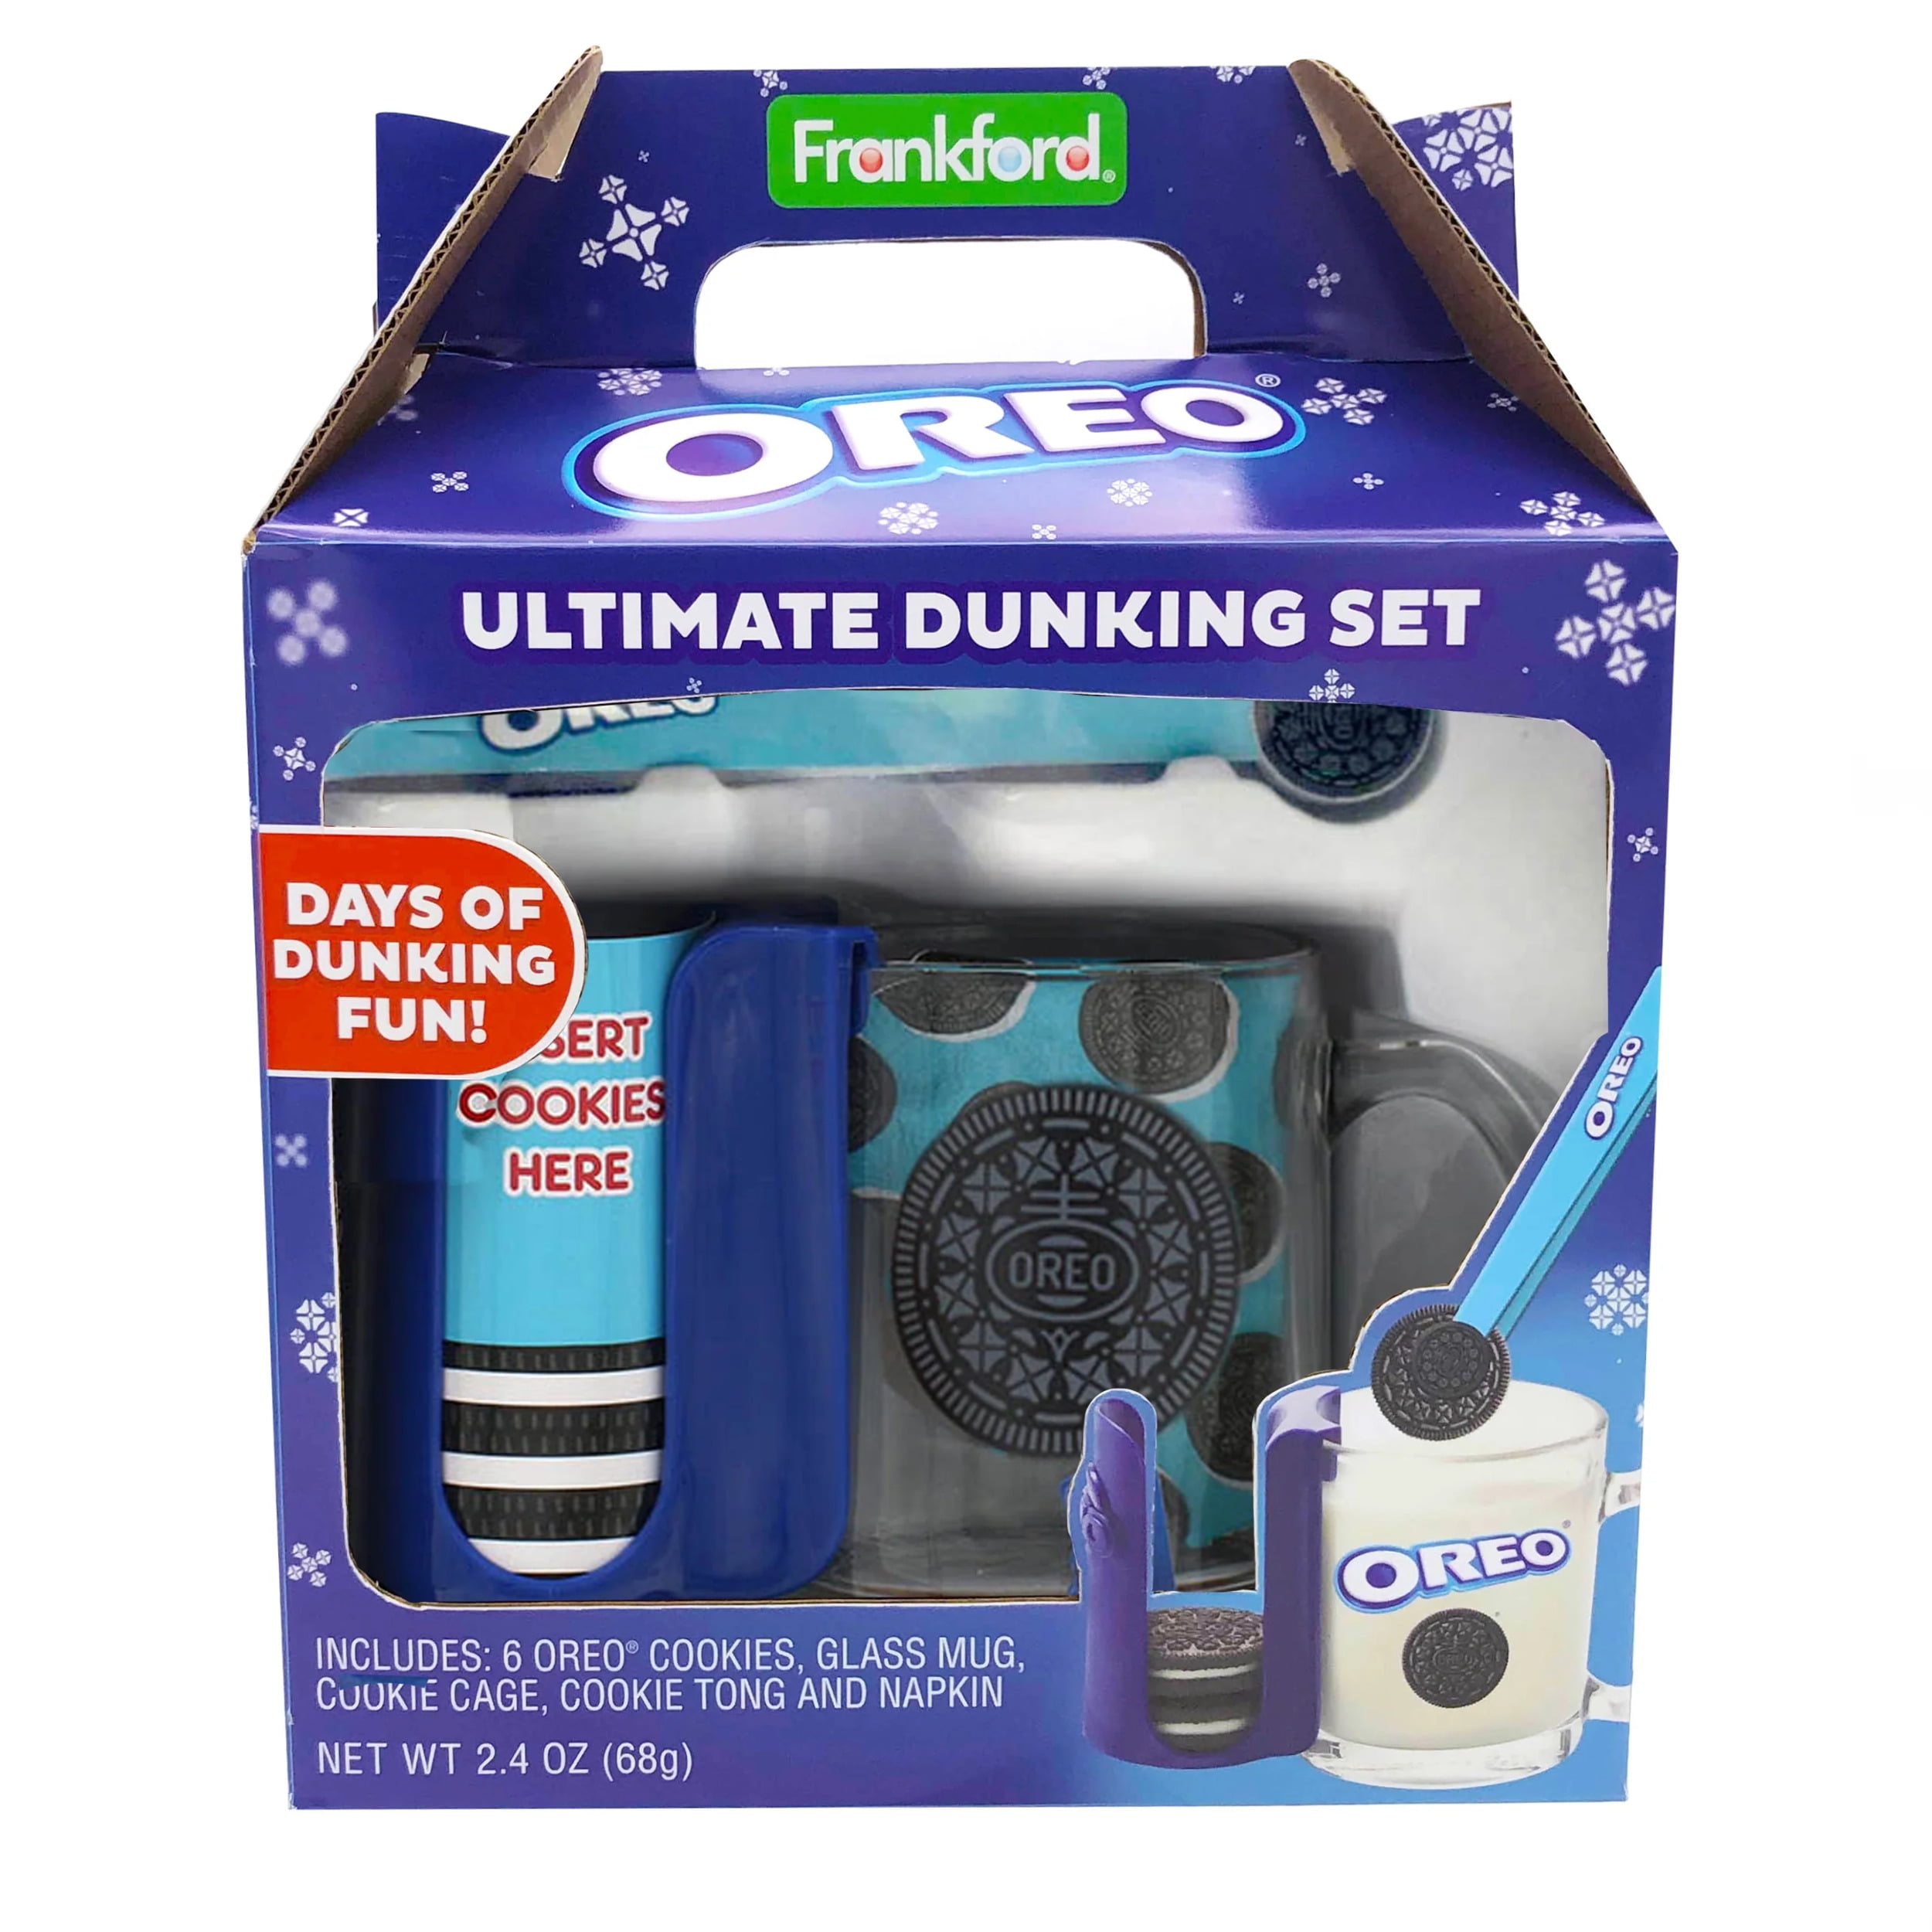 Ohso Little Cookie Dipper - 8 oz Glass, Oreo Cookie Dunker Funnel, 4 Cookie Dipping Milk Levels, Dunk 2 Cookies at Once, Holds Cookies at Desired